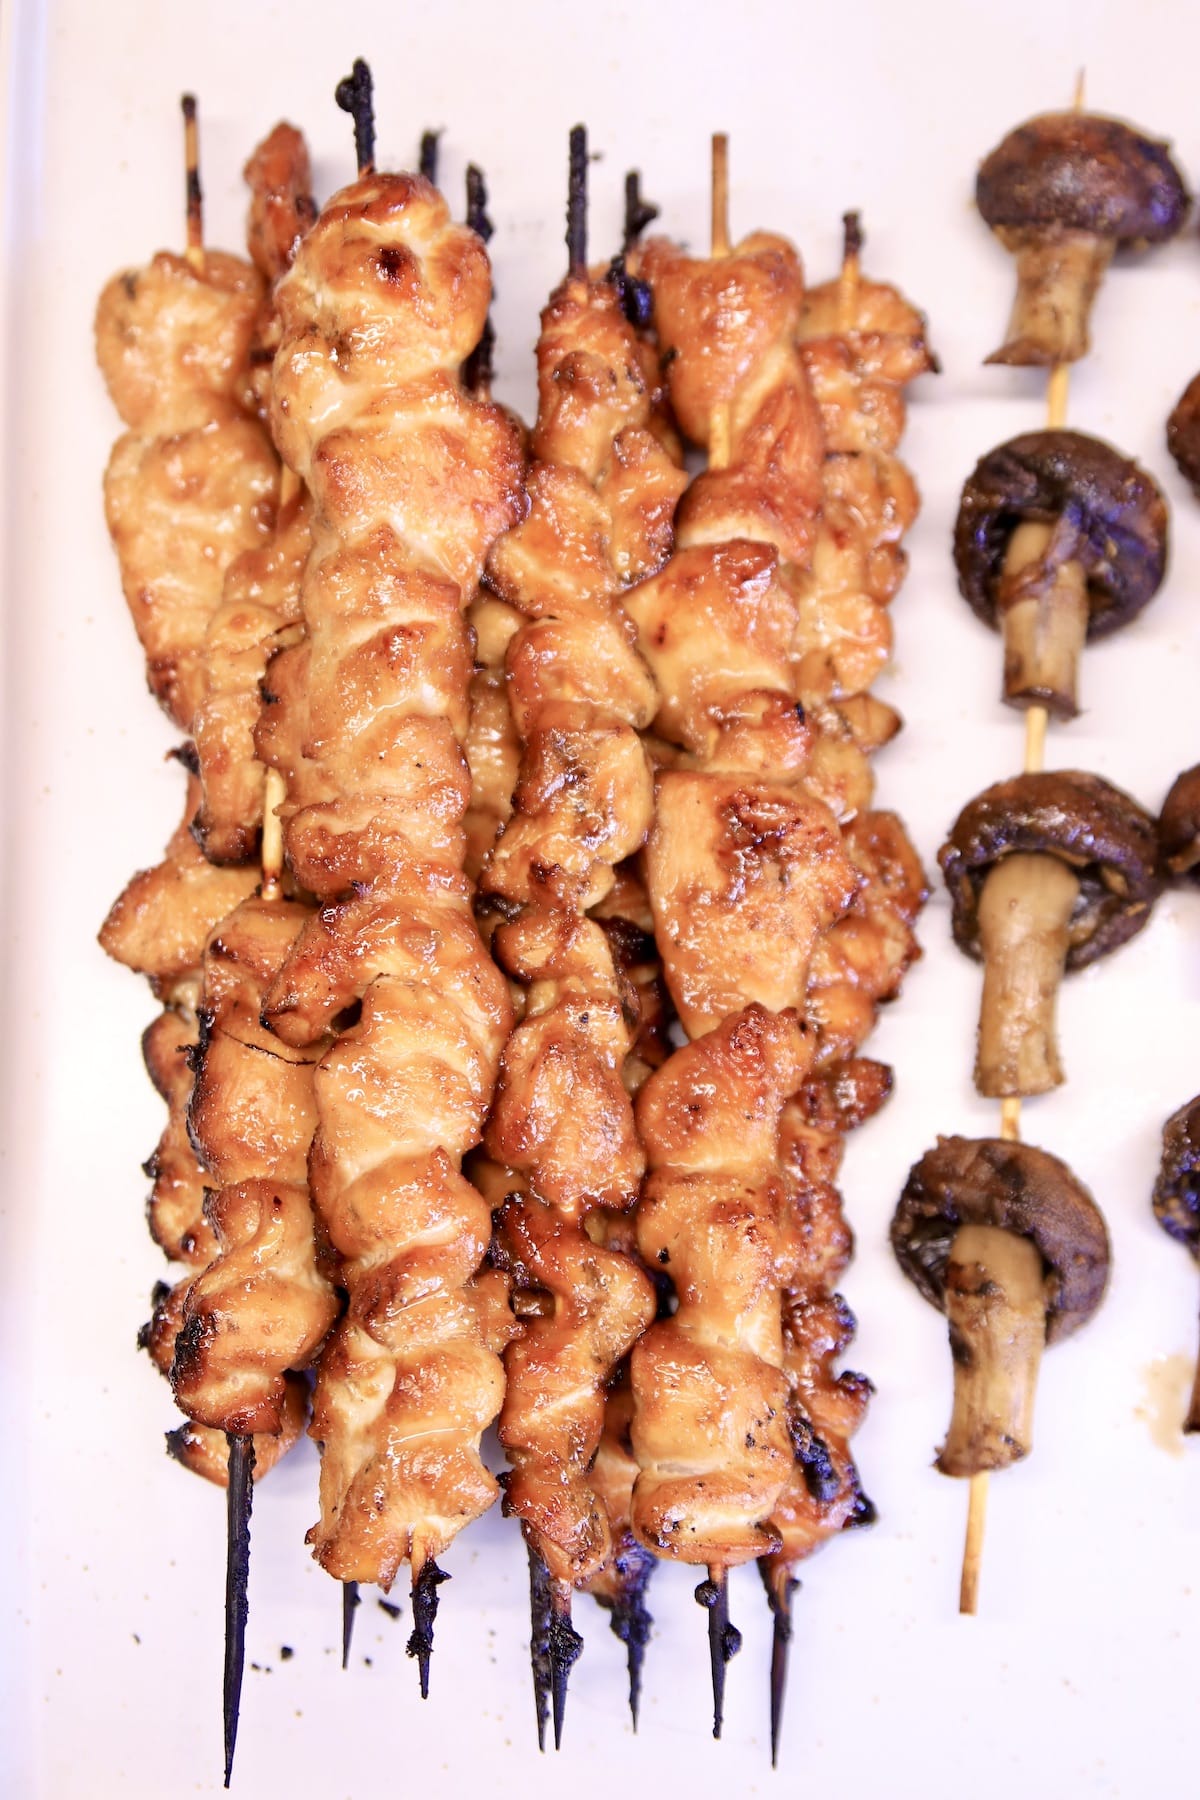 Chicken skewers with mushrooms on a platter.